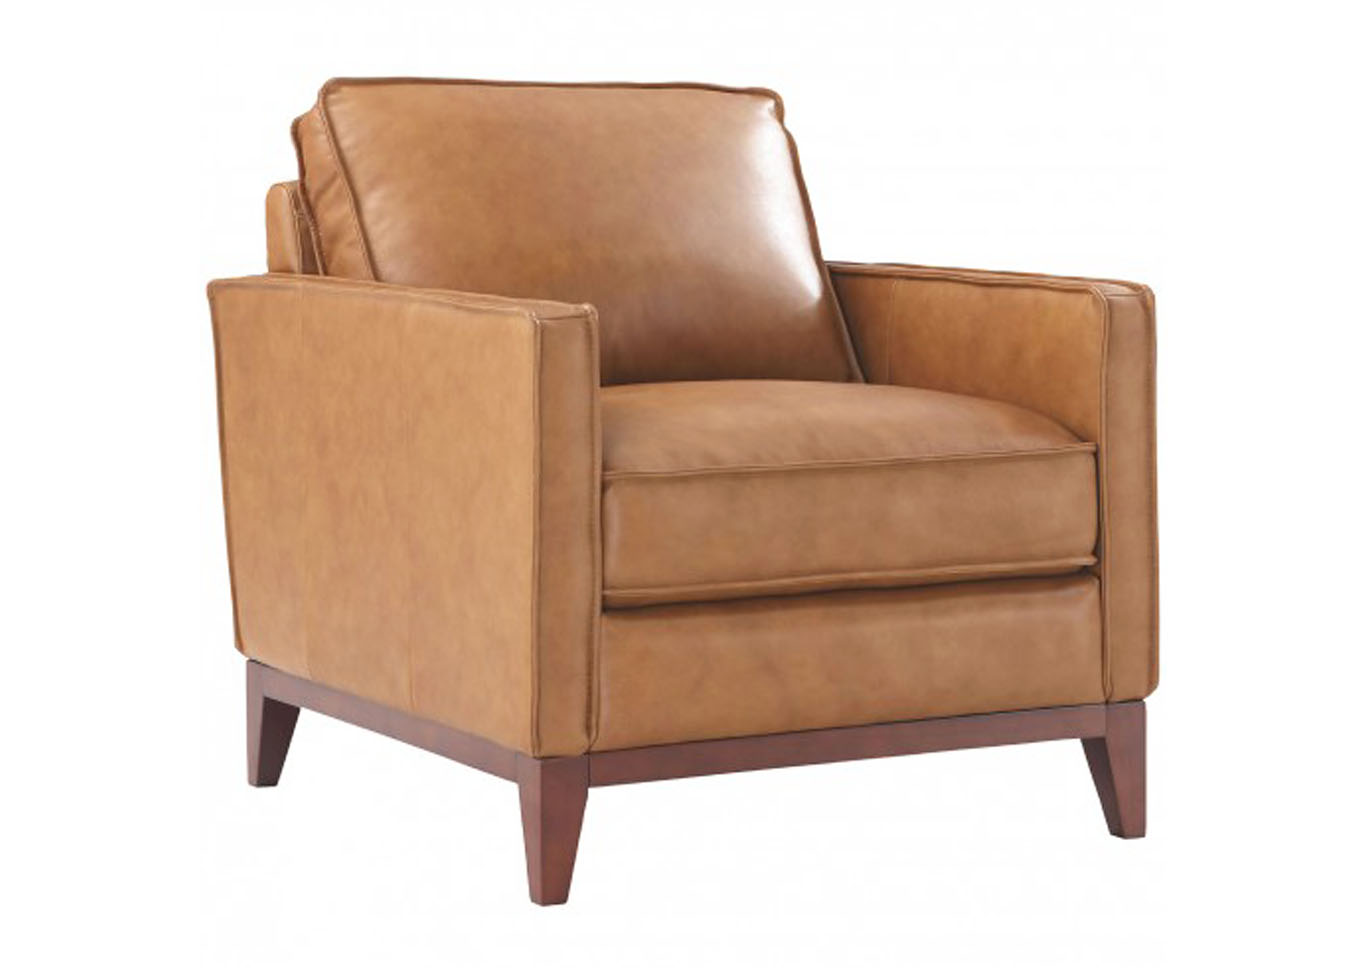 Newport Top Grain Leather Sofa and Chair,Instore